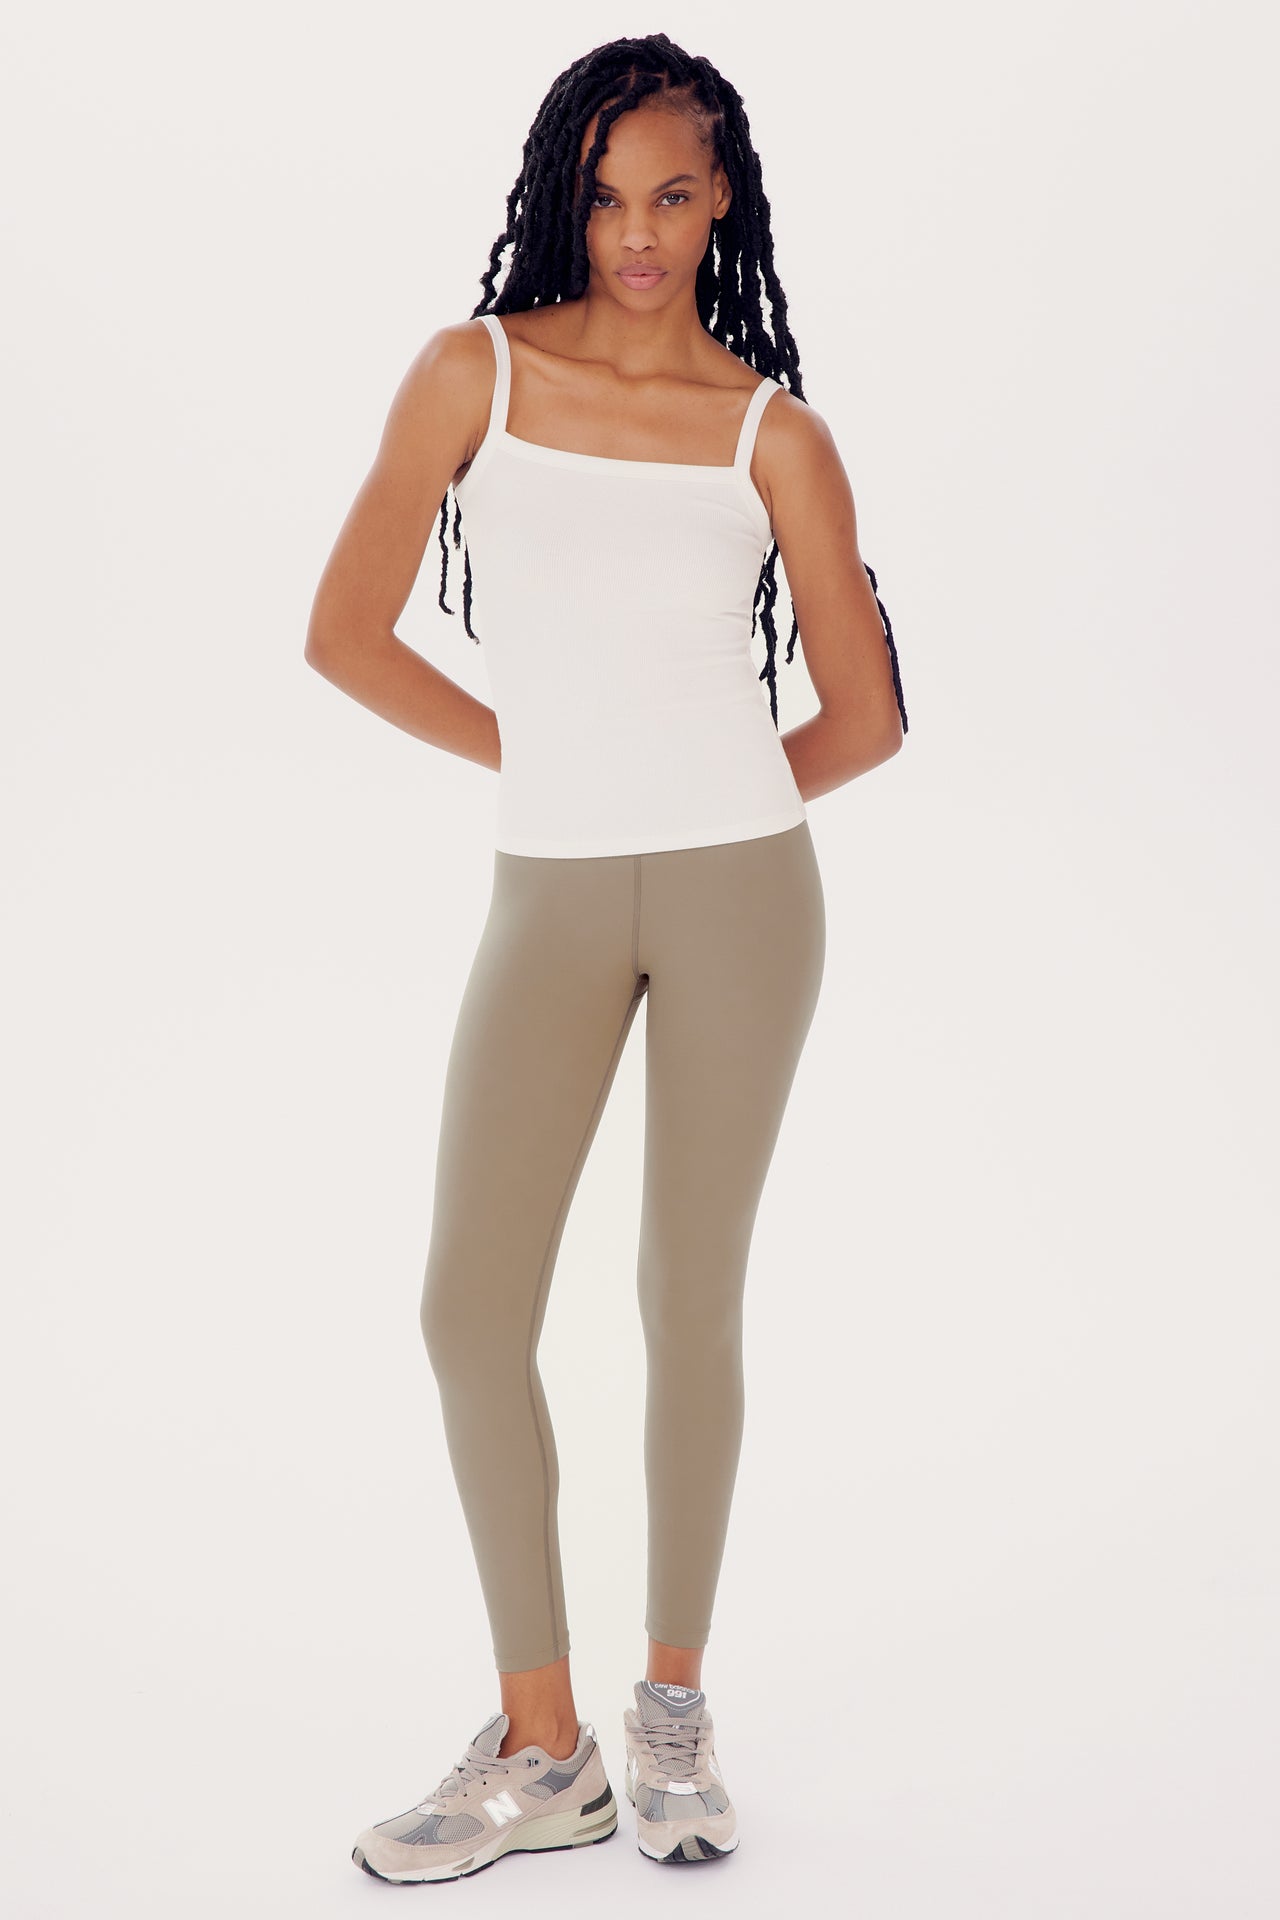 A woman in a SPLITS59 Romy Rib Tank - White and olive leggings stands confidently against a white background.